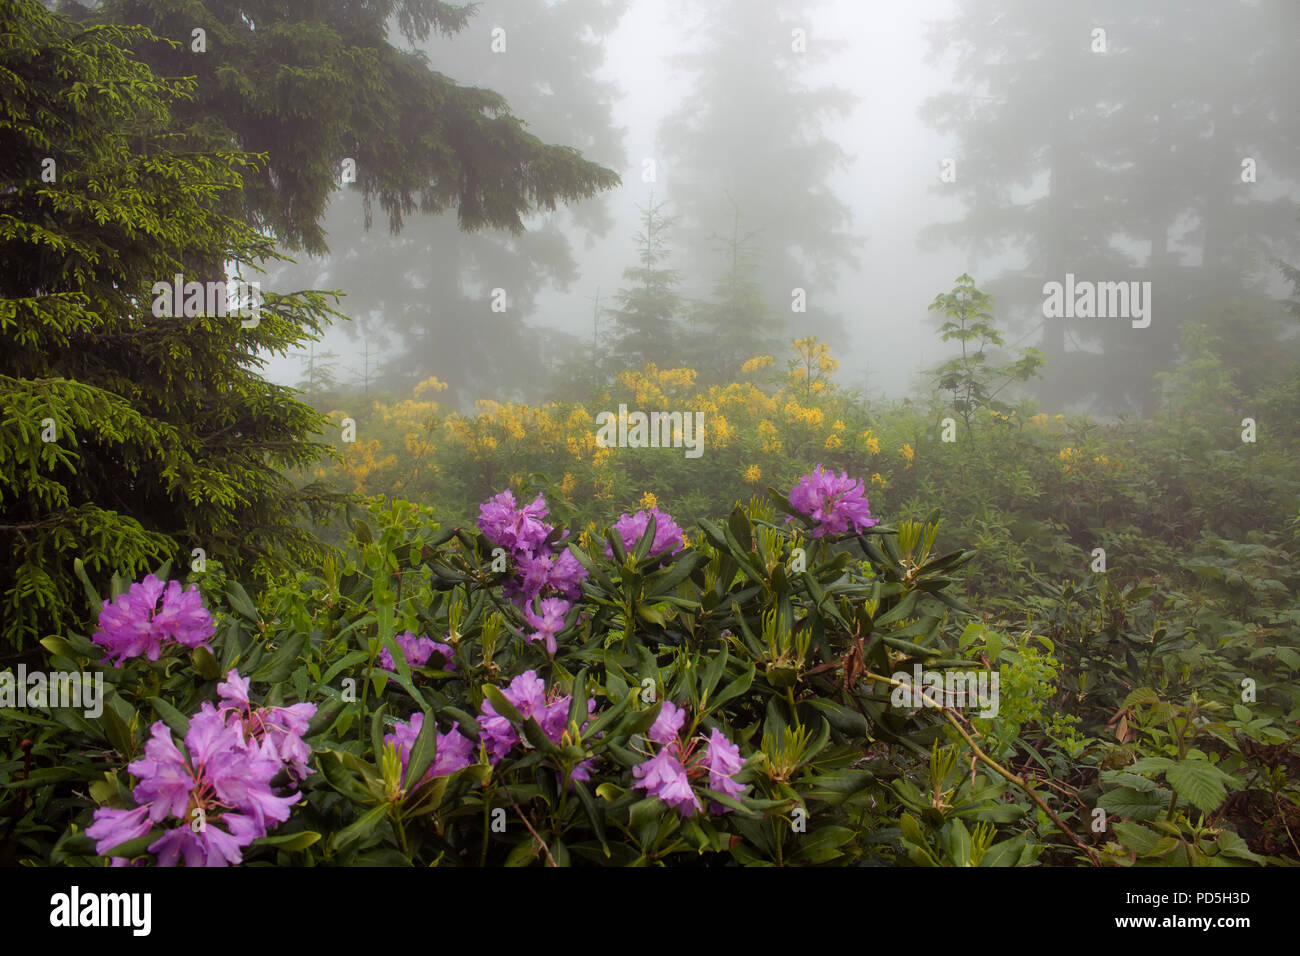 View of pine trees, mountain roses in fog (Rhododendron ponticum and luteum) The image is captured in the mountain called Sis of Trabzon city located  Stock Photo